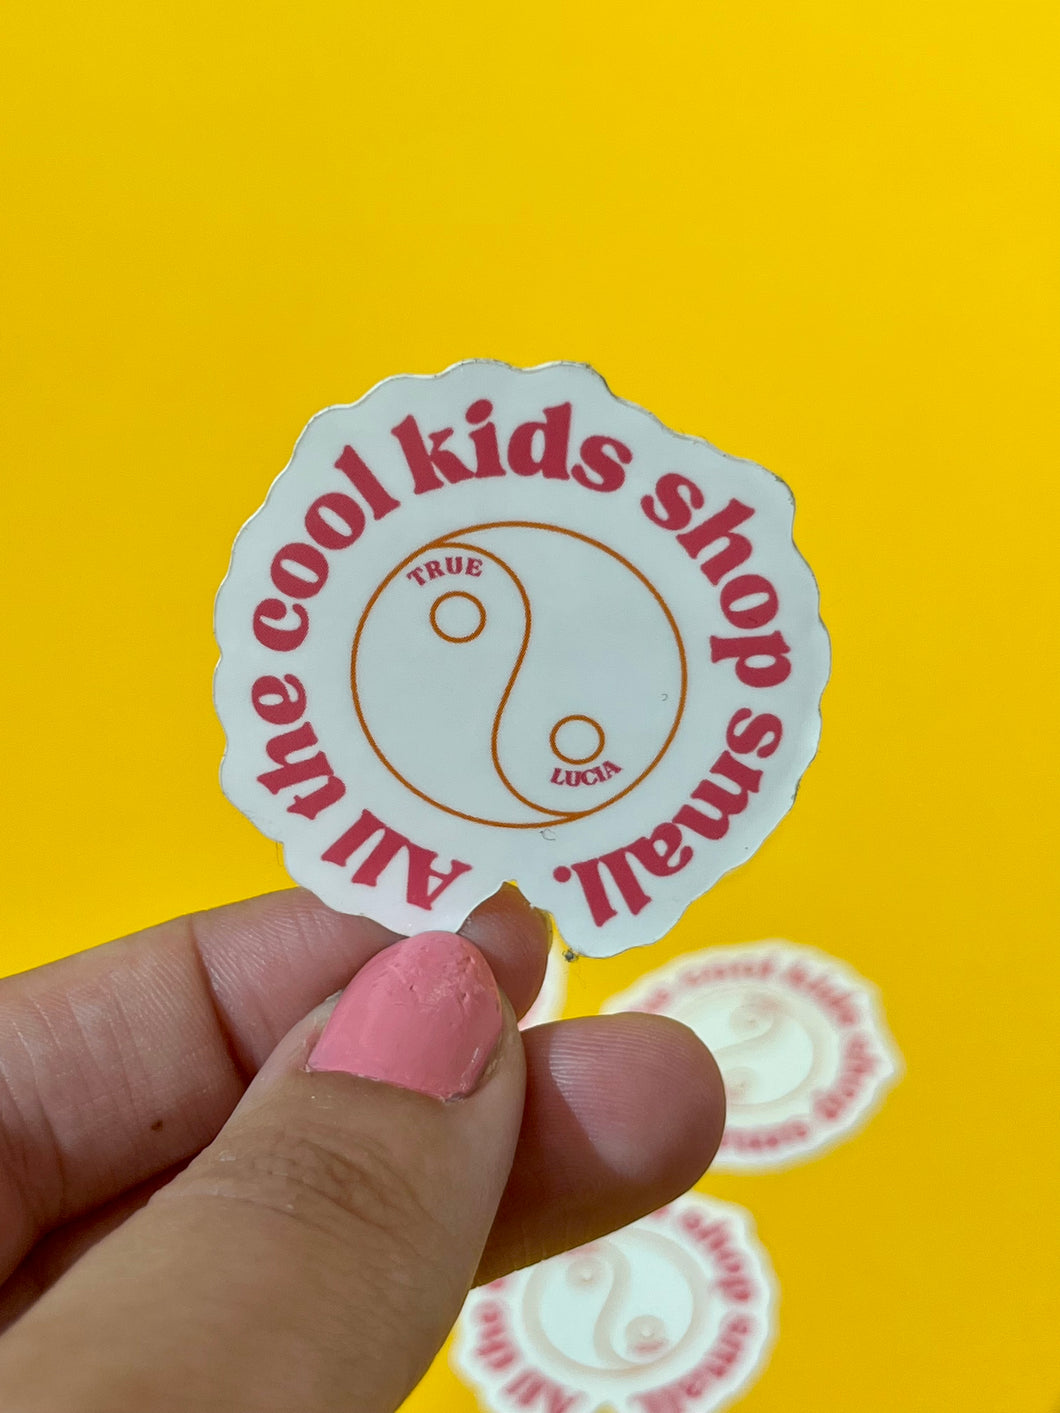 All the cool kids shop small sticker